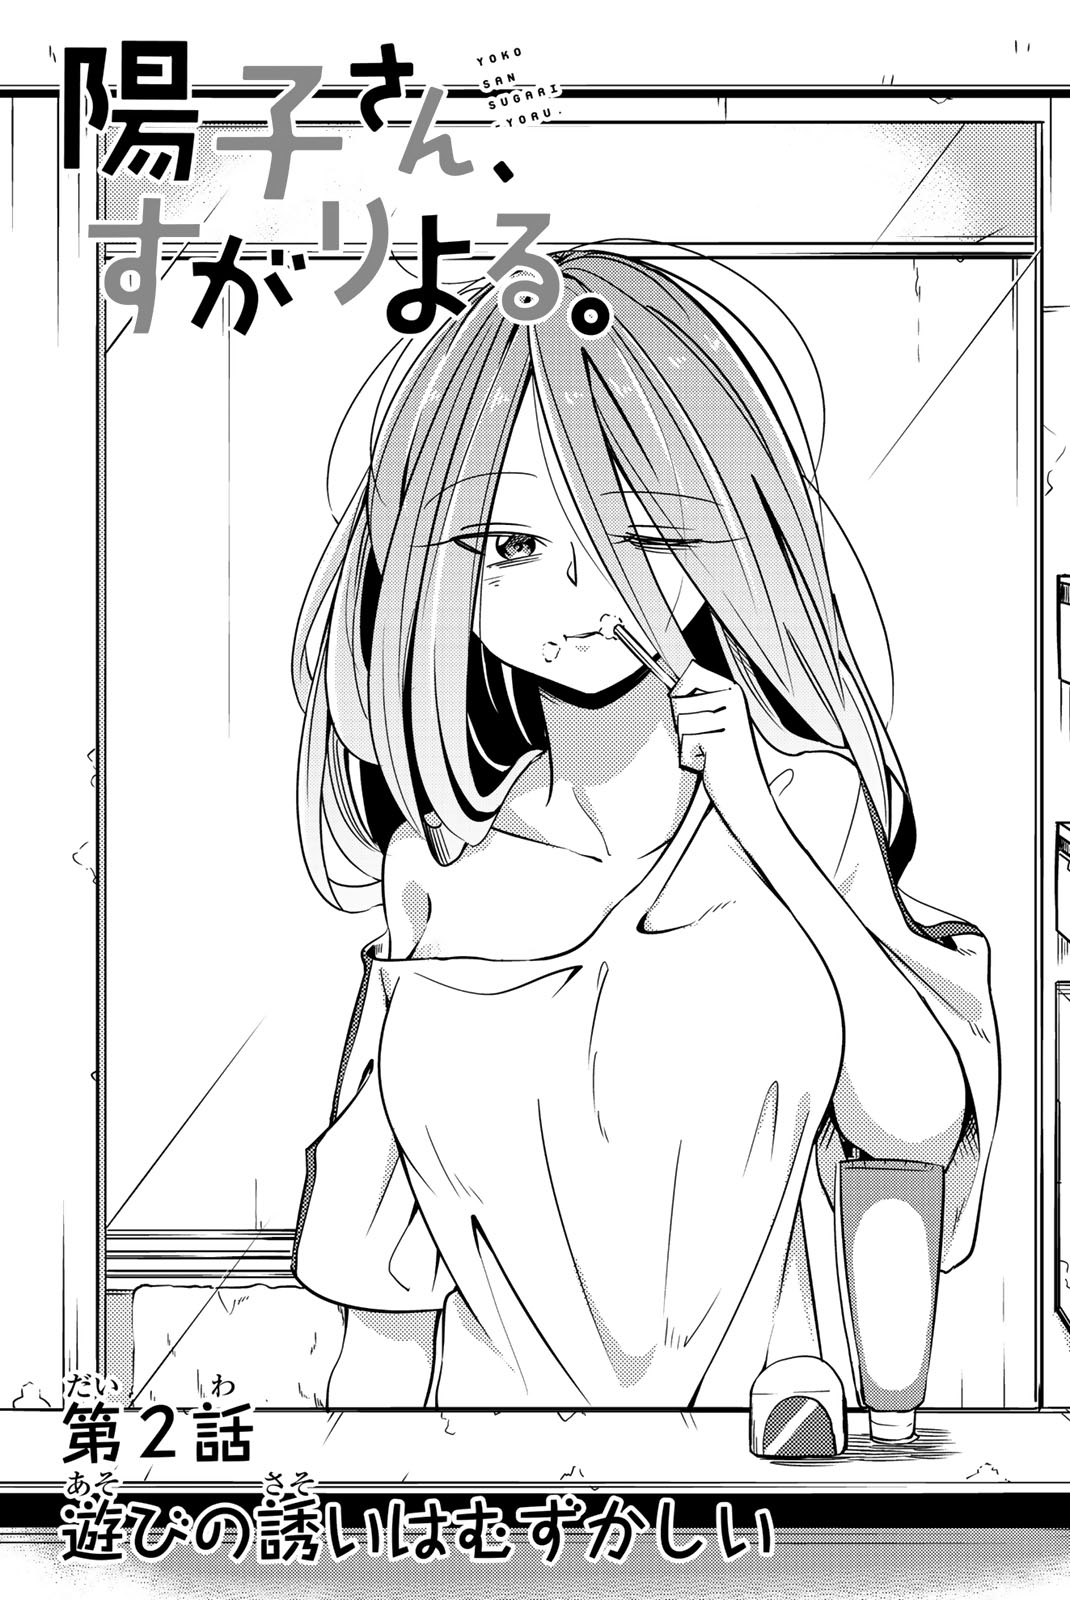 Yoko san, Sugari Yoru. Vol. 1 Ch. 2 Asking Someone to Play With You is Difficult for All